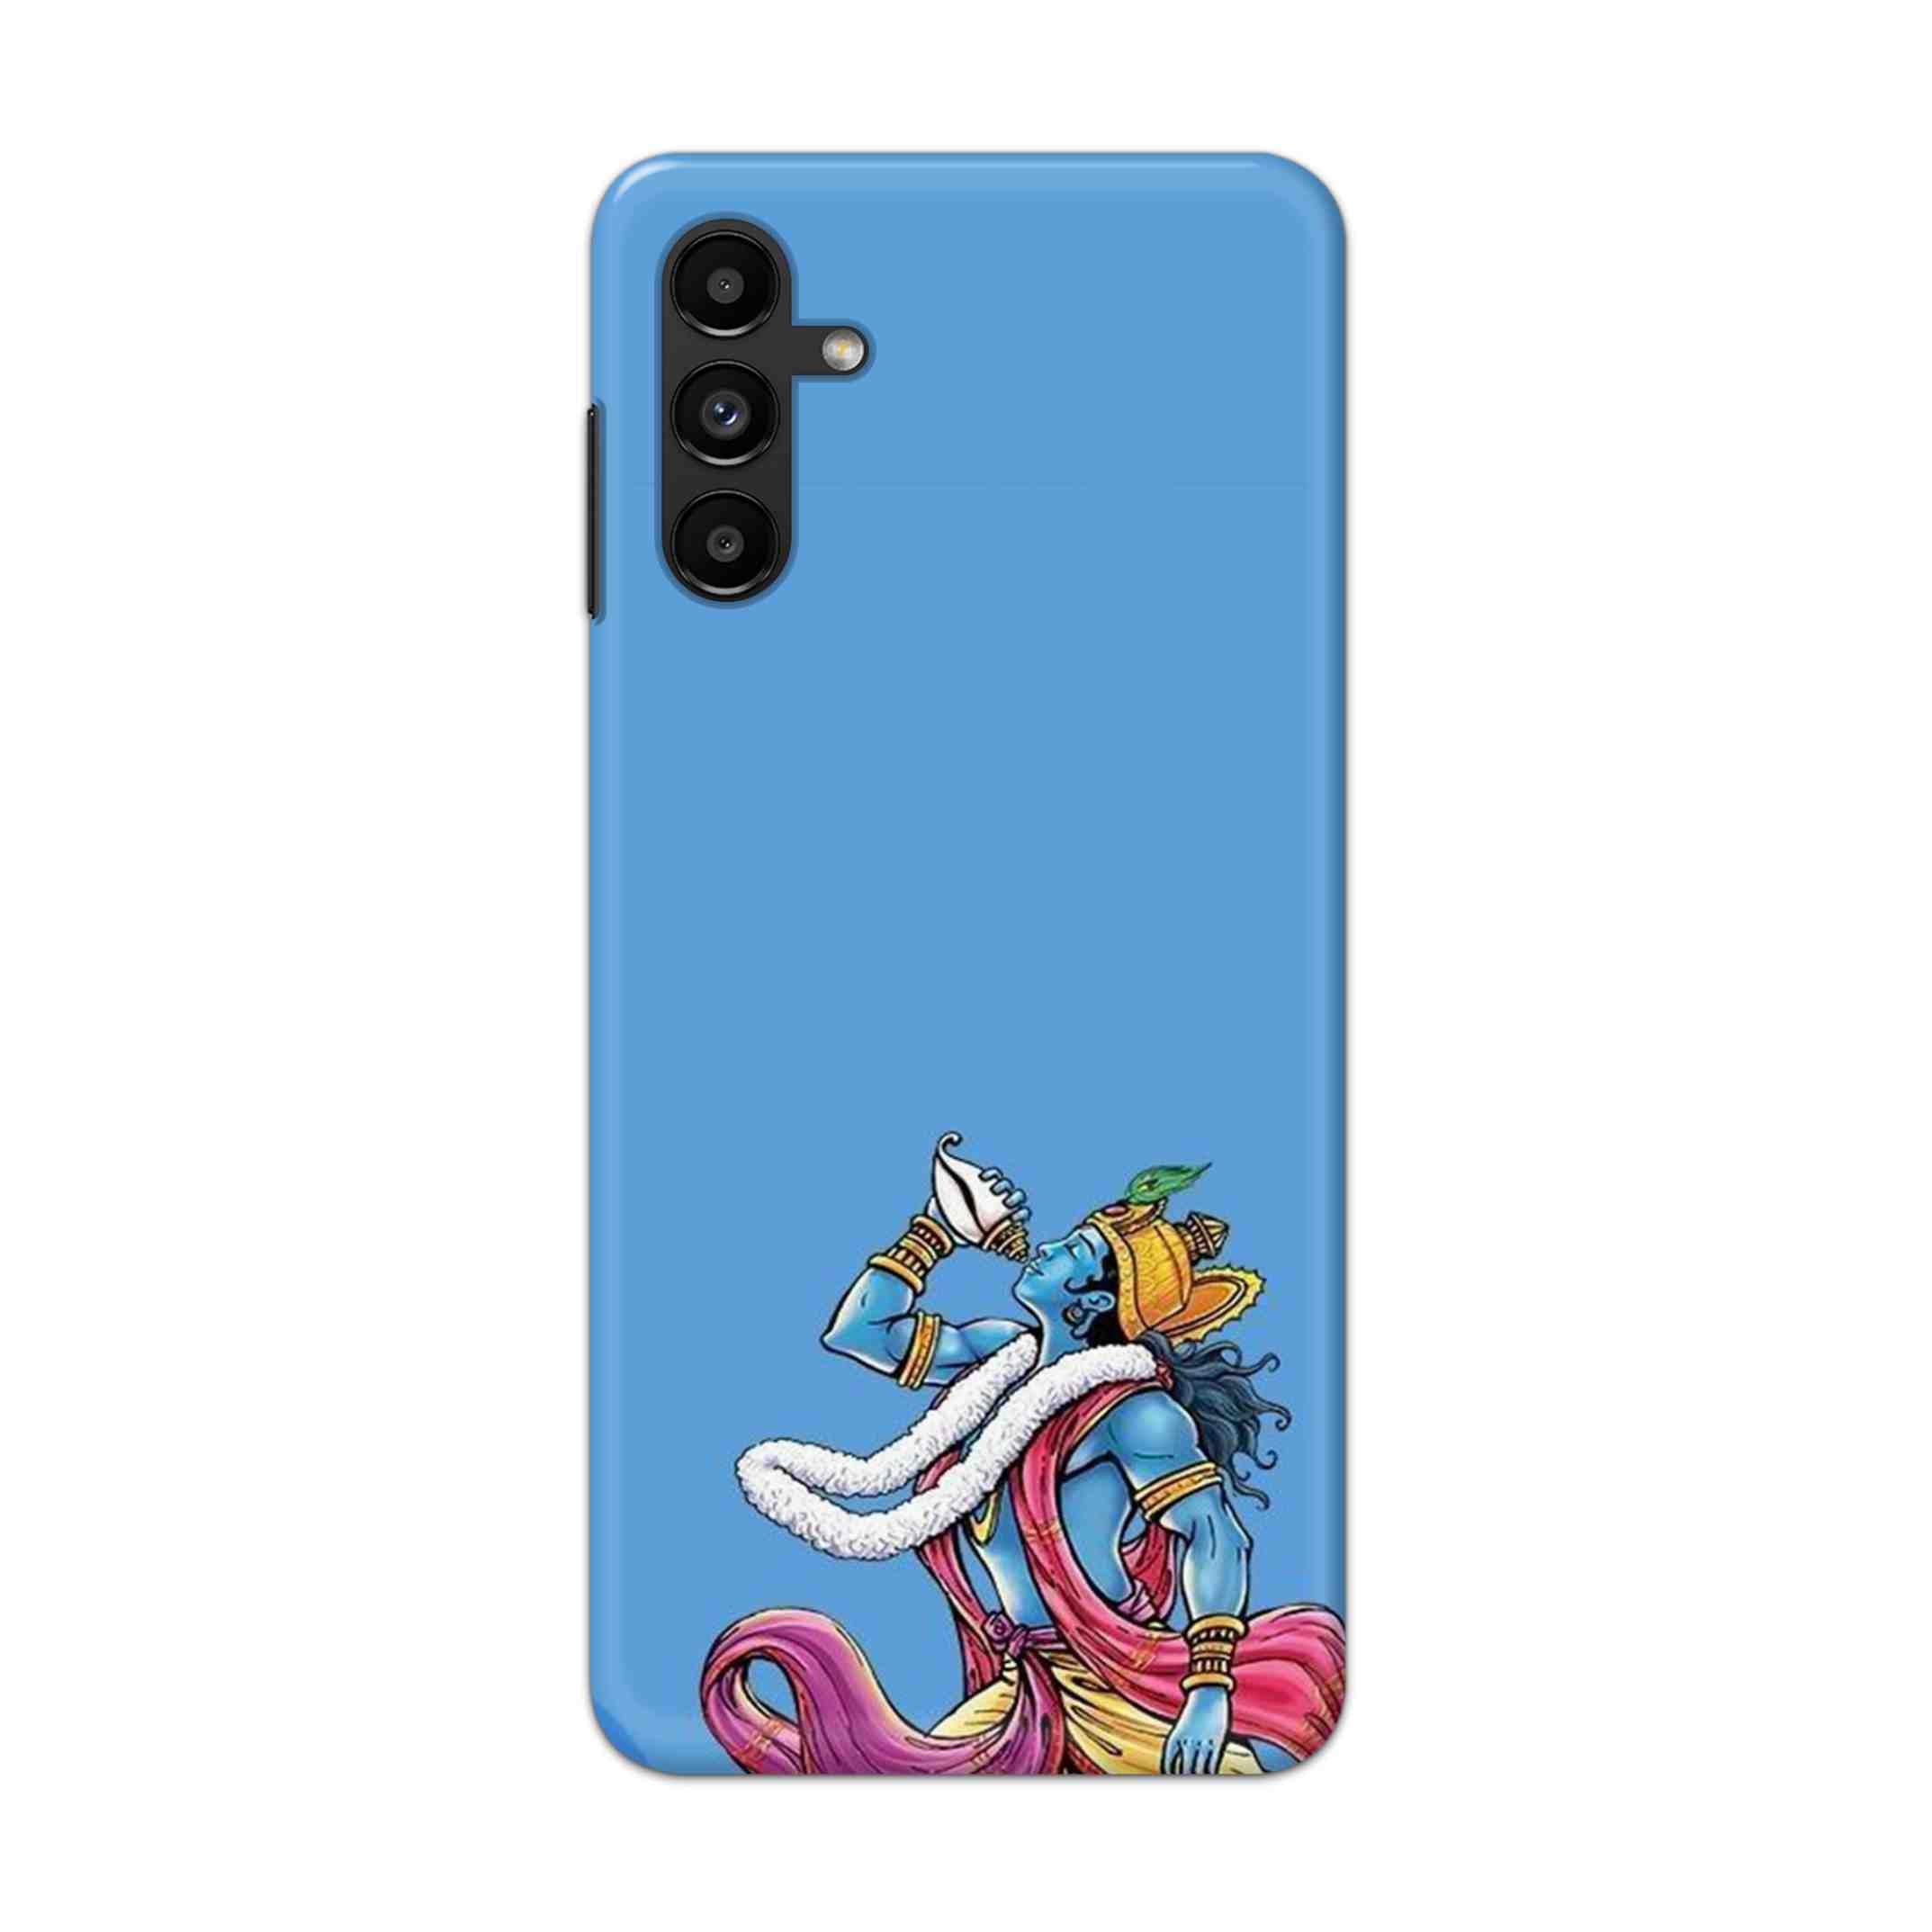 Buy Krishna Hard Back Mobile Phone Case/Cover For Galaxy A13 (5G) Online